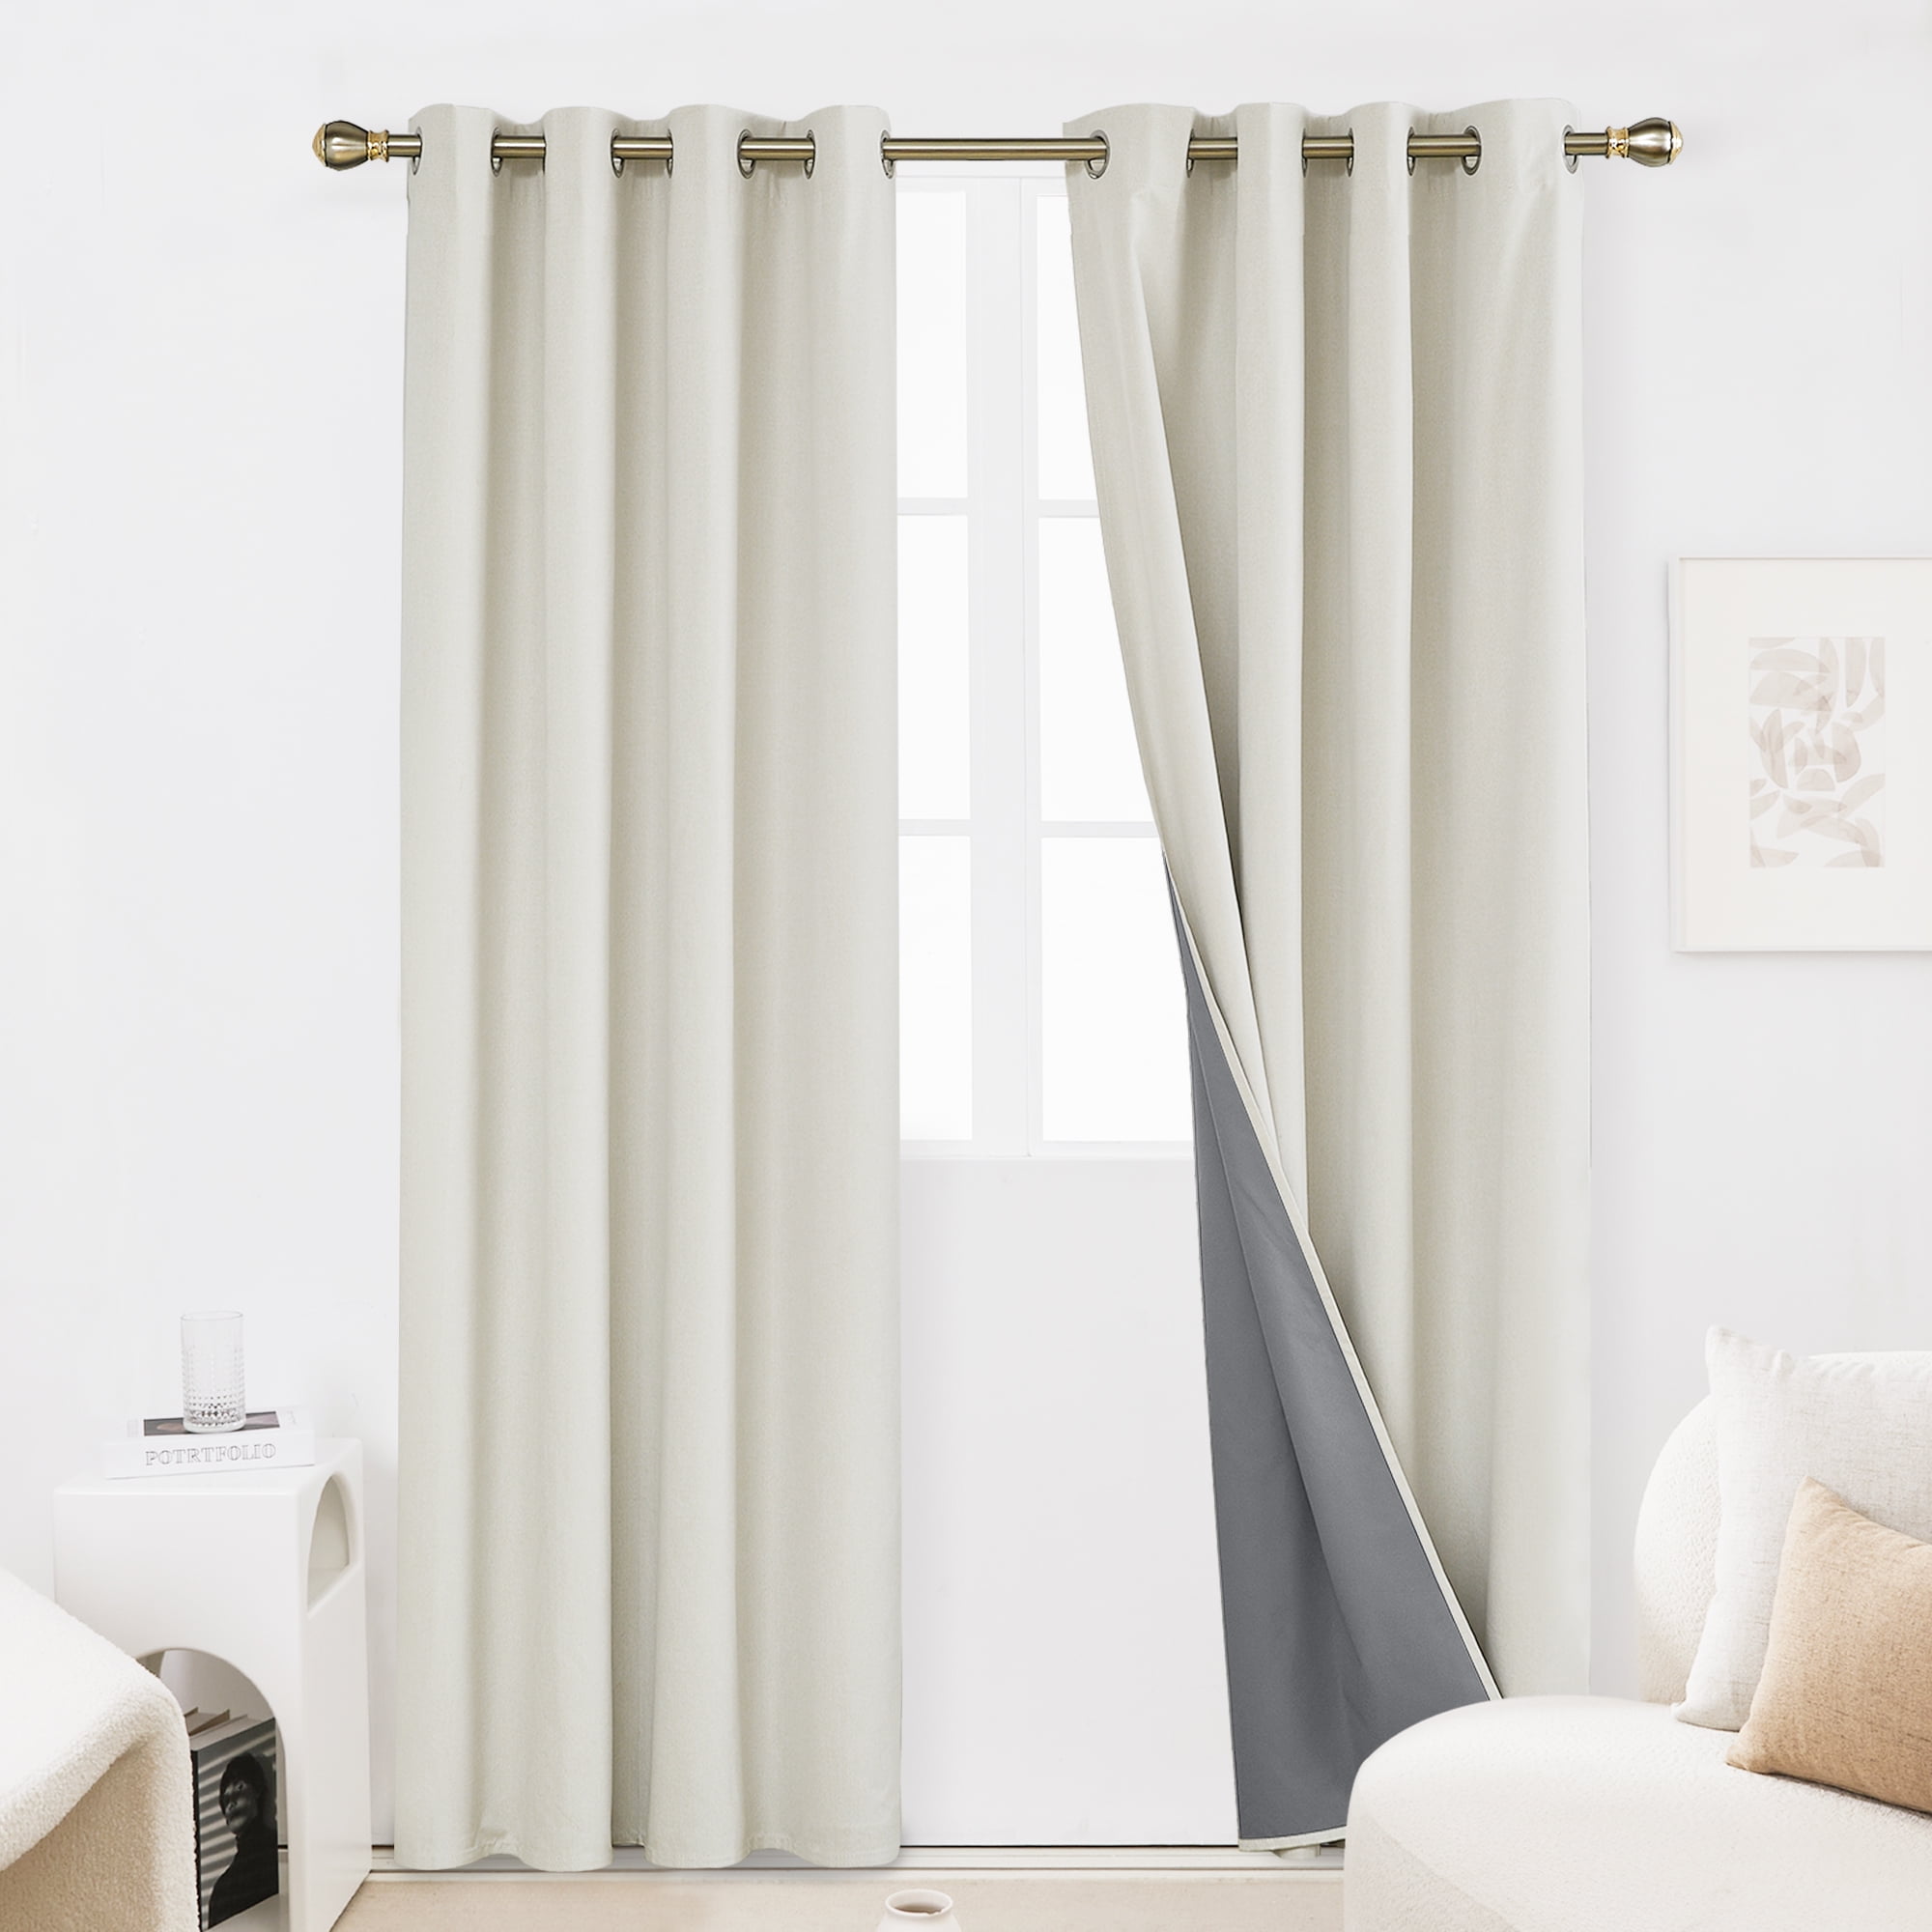 100% Blackout 2 PC Rod Pocket Faux Linen Thermal Bedroom Window Curtain Drapes 